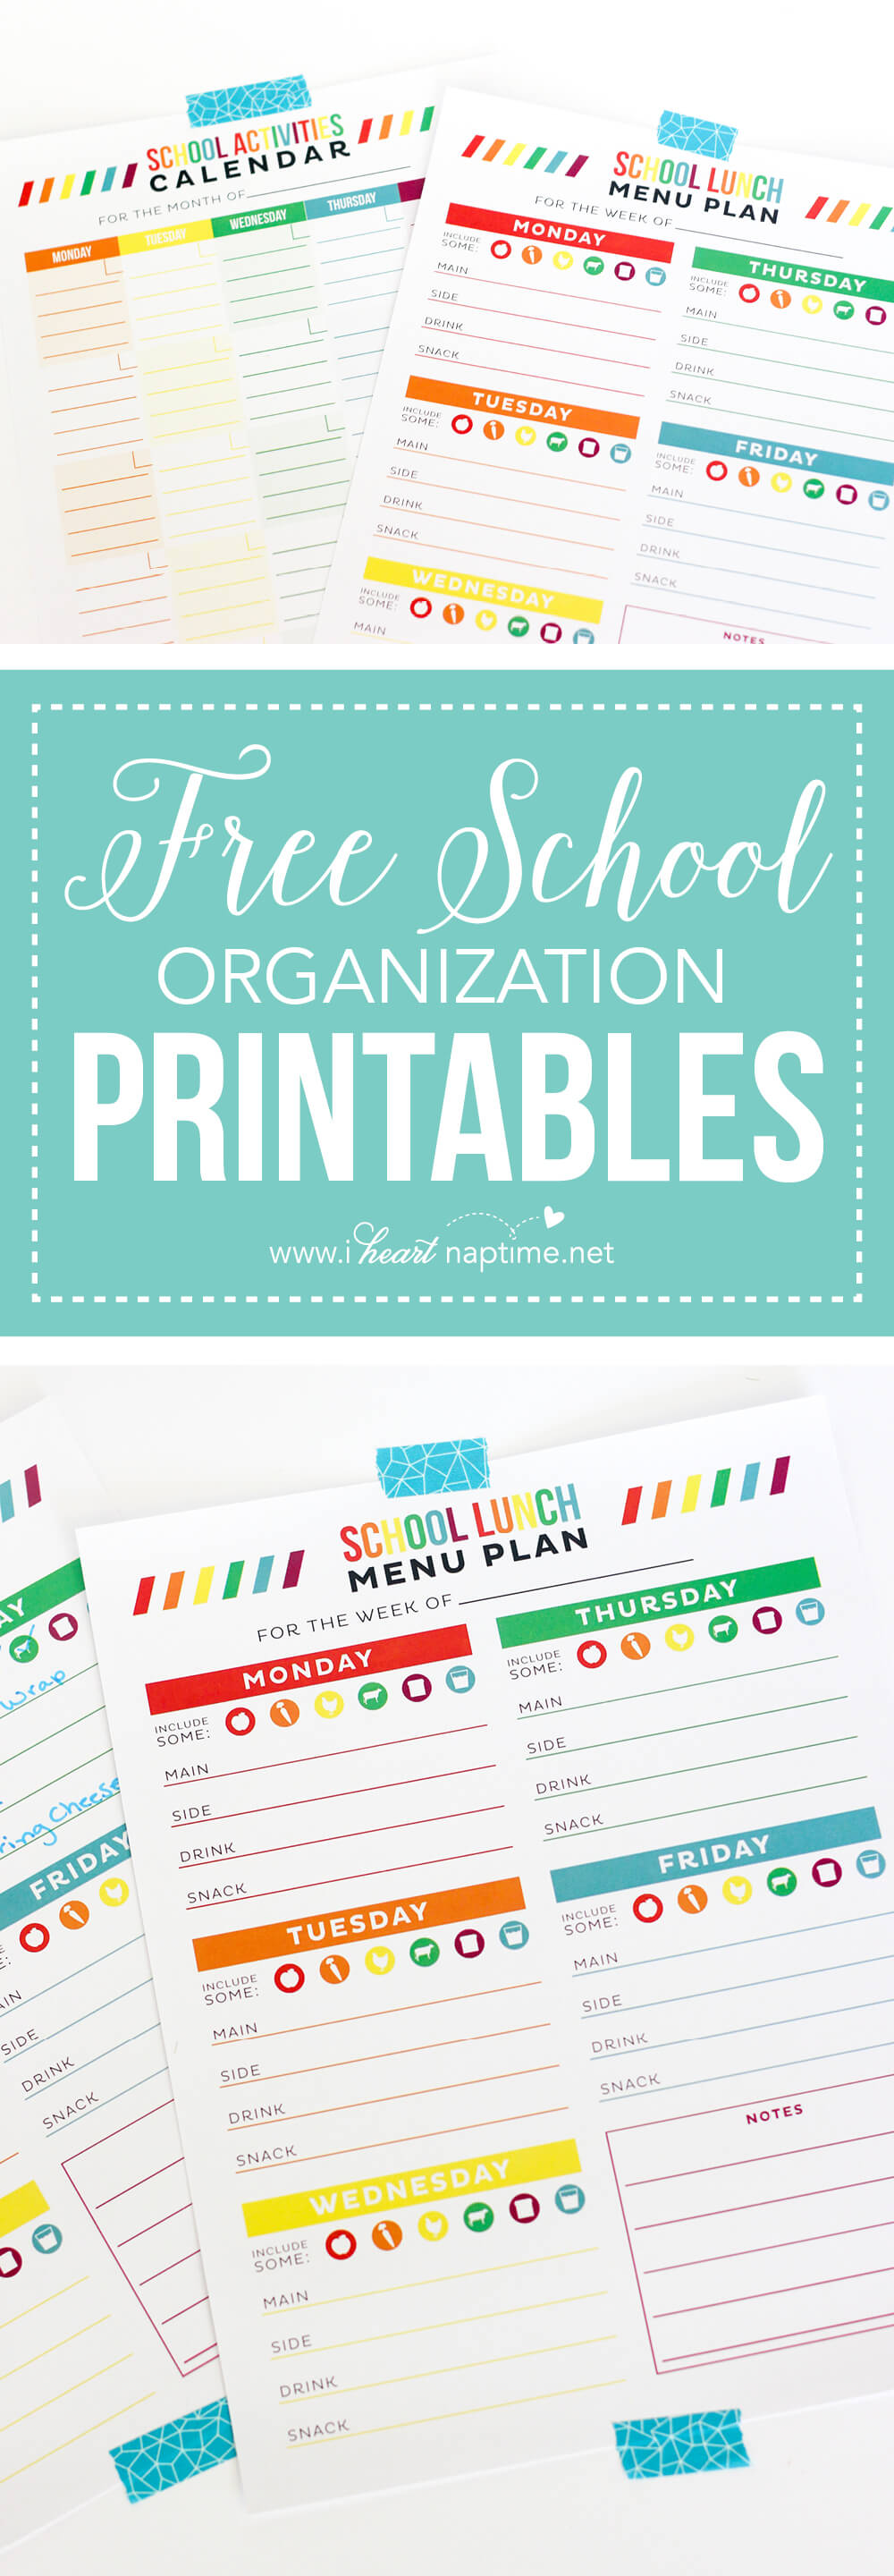 FREE School Organization Printables... print out these free planners to help you stay organized this school year! We have a free school lunch menu planner and a month-at-a-glance activities planner!